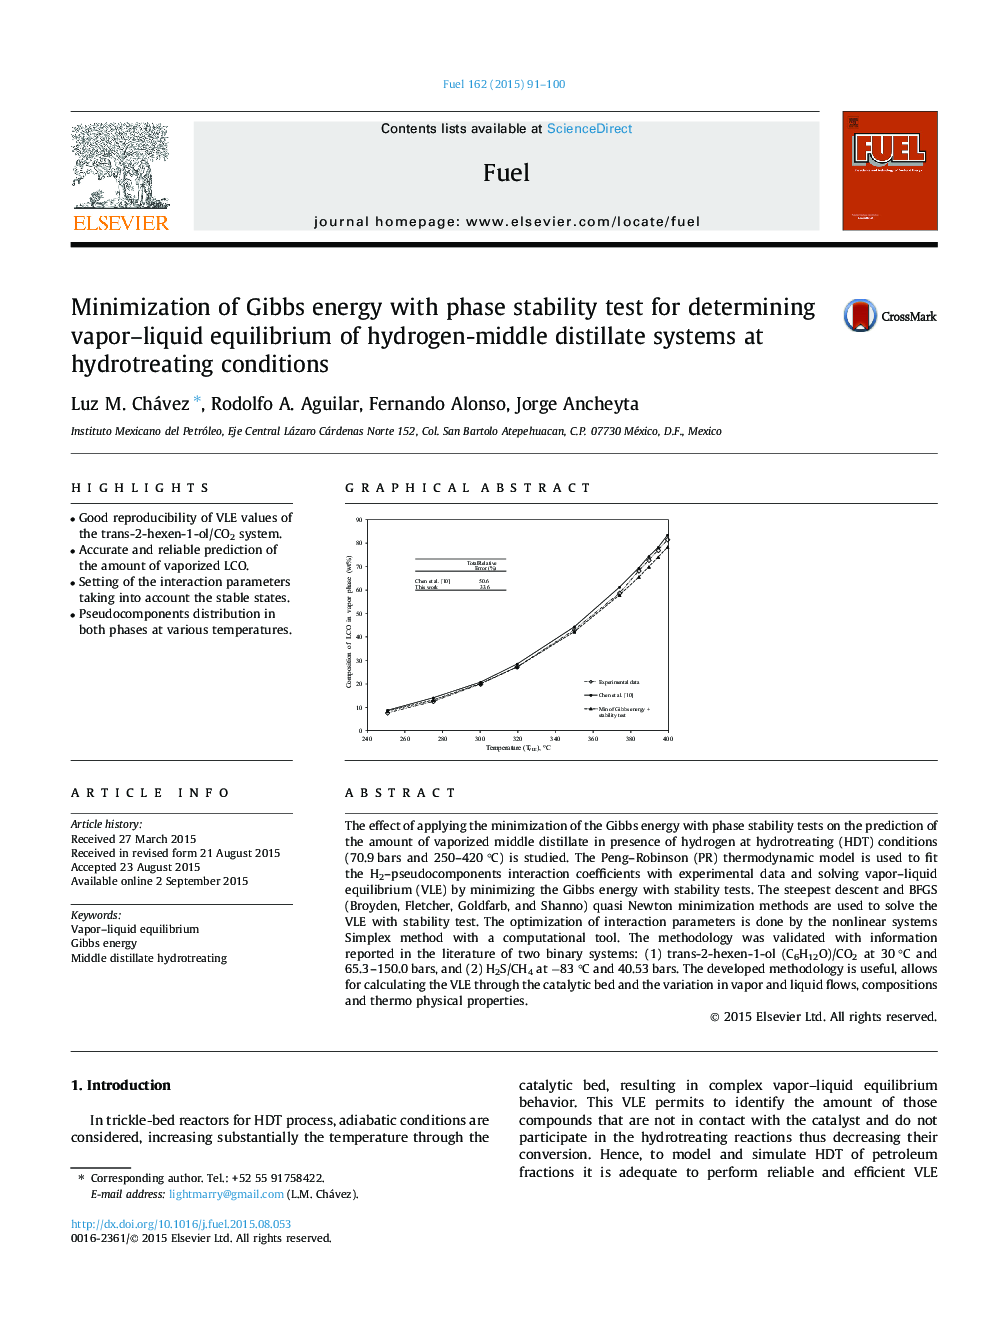 Minimization of Gibbs energy with phase stability test for determining vapor-liquid equilibrium of hydrogen-middle distillate systems at hydrotreating conditions